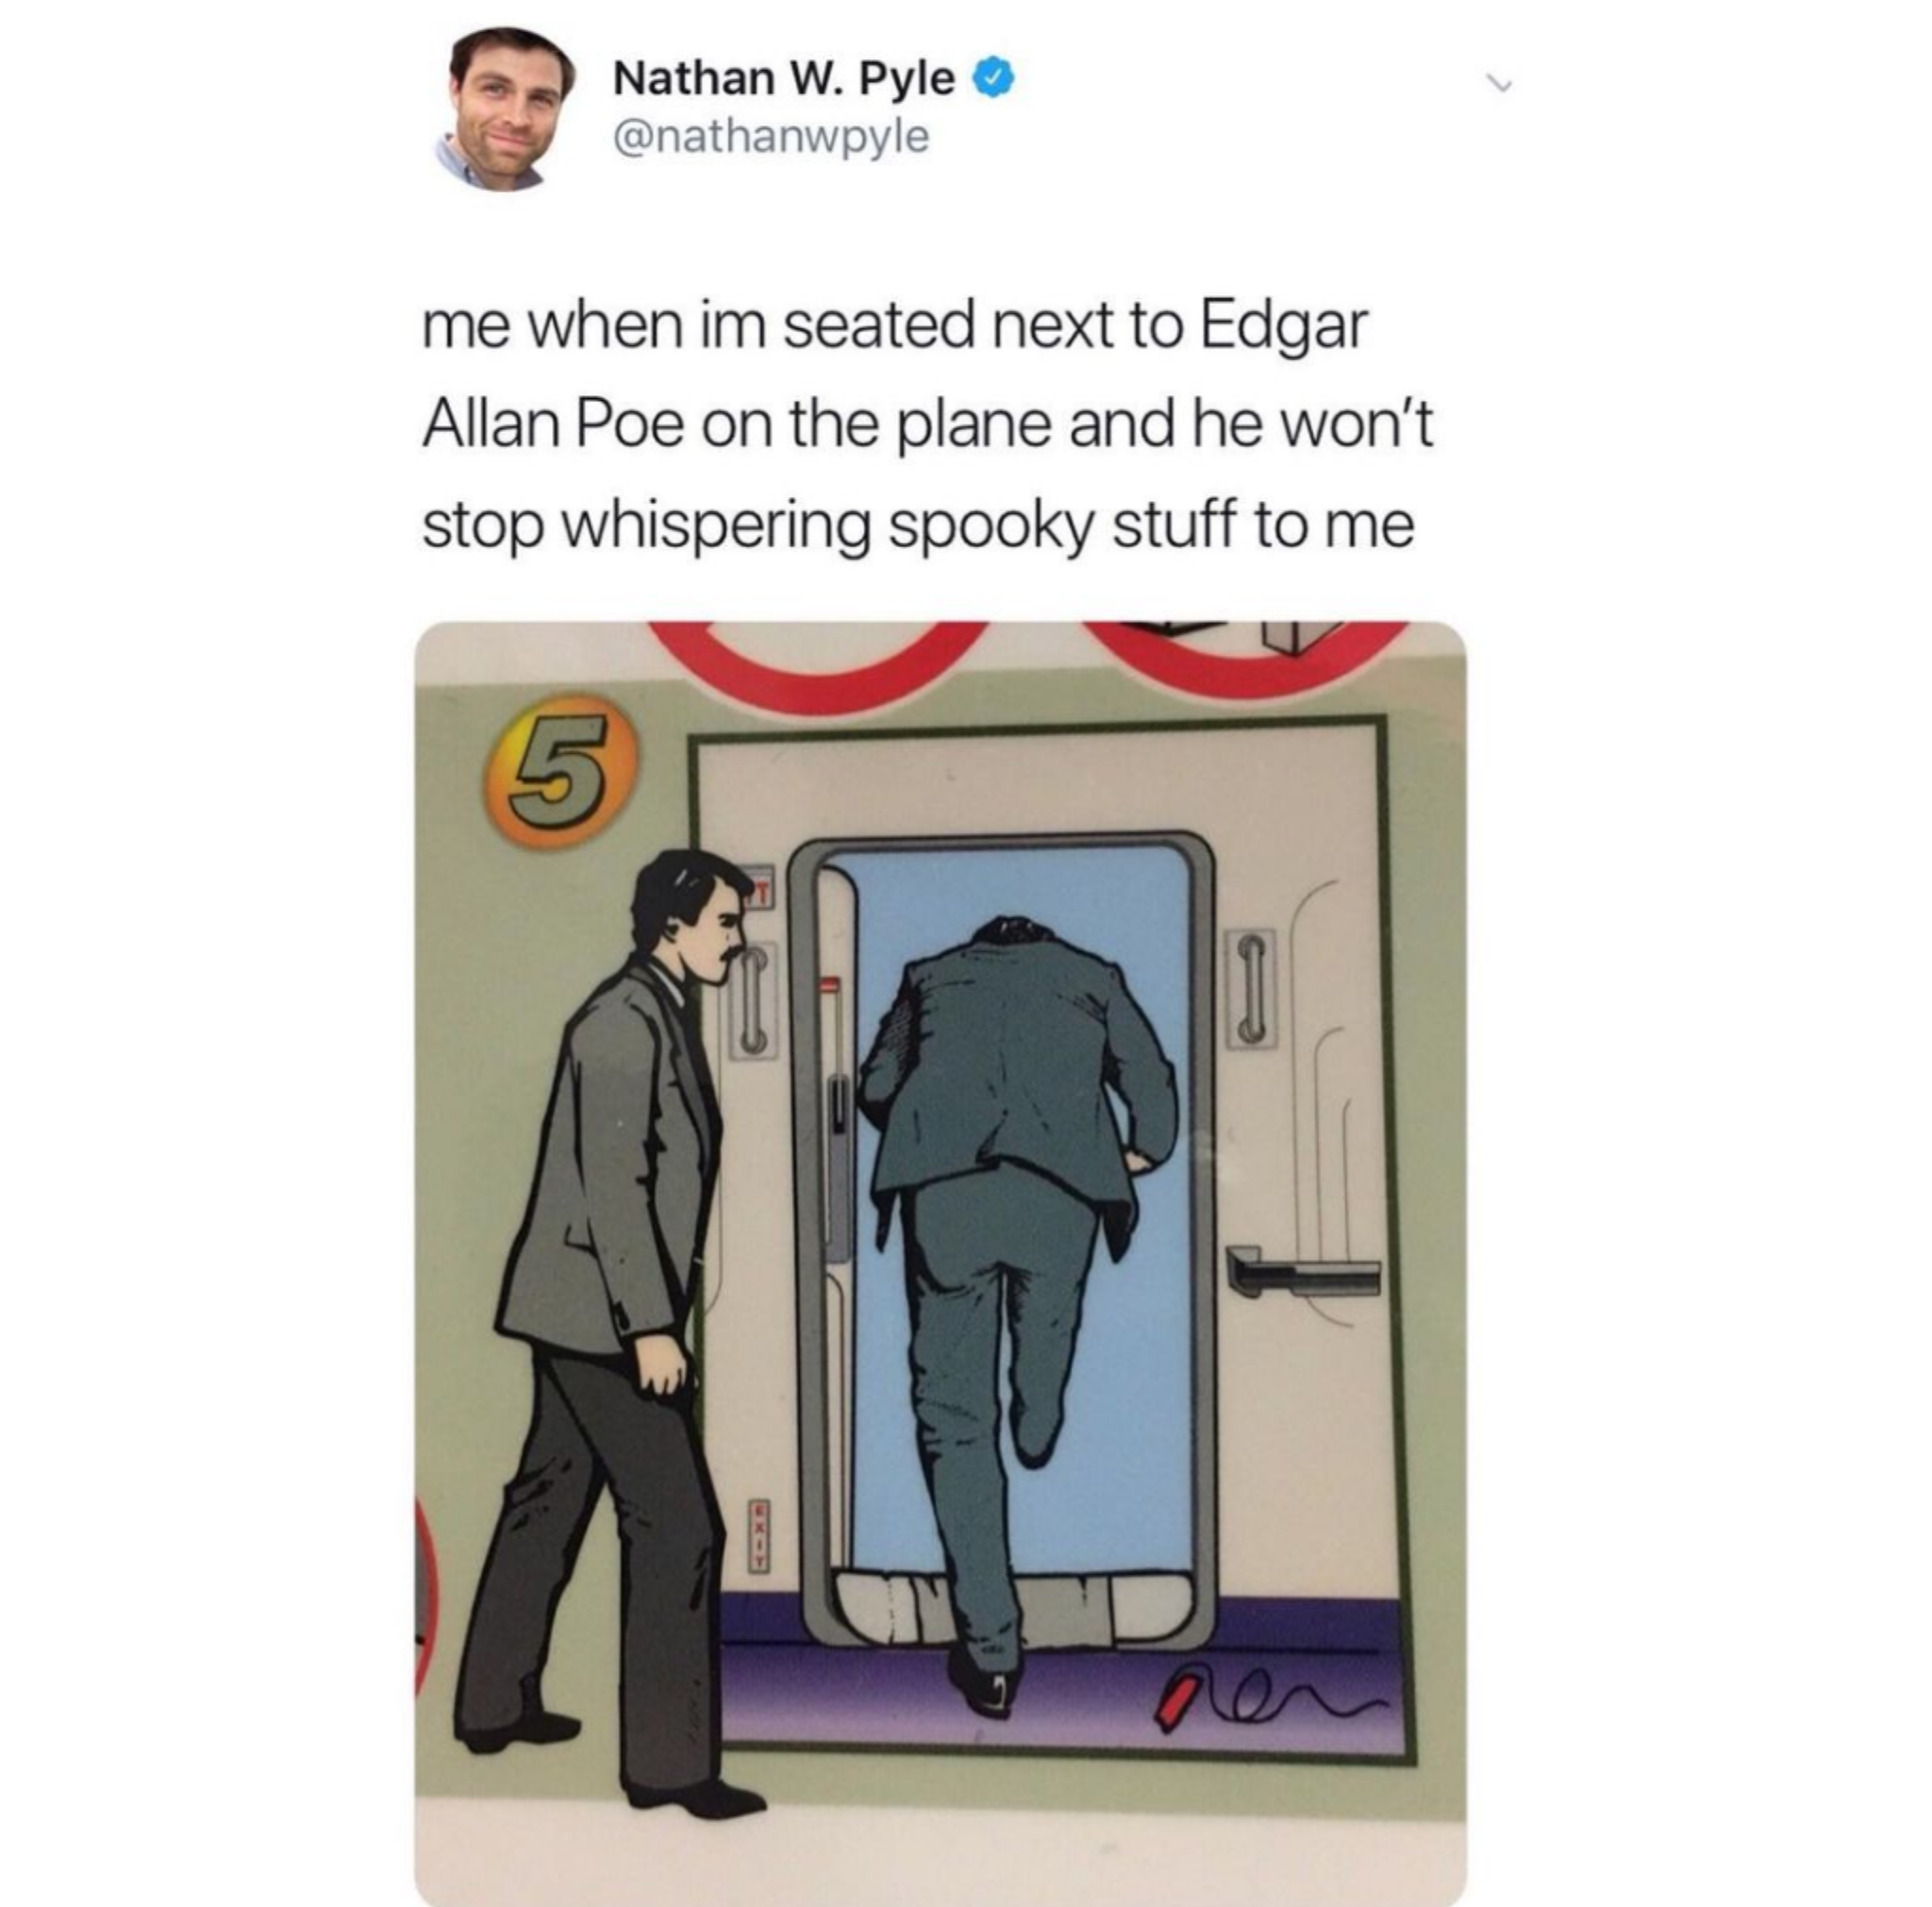 dank  memes - cartoon - Nathan W. Pyle me when im seated next to Edgar Allan Poe on the plane and he won't stop whispering spooky stuff to me 5